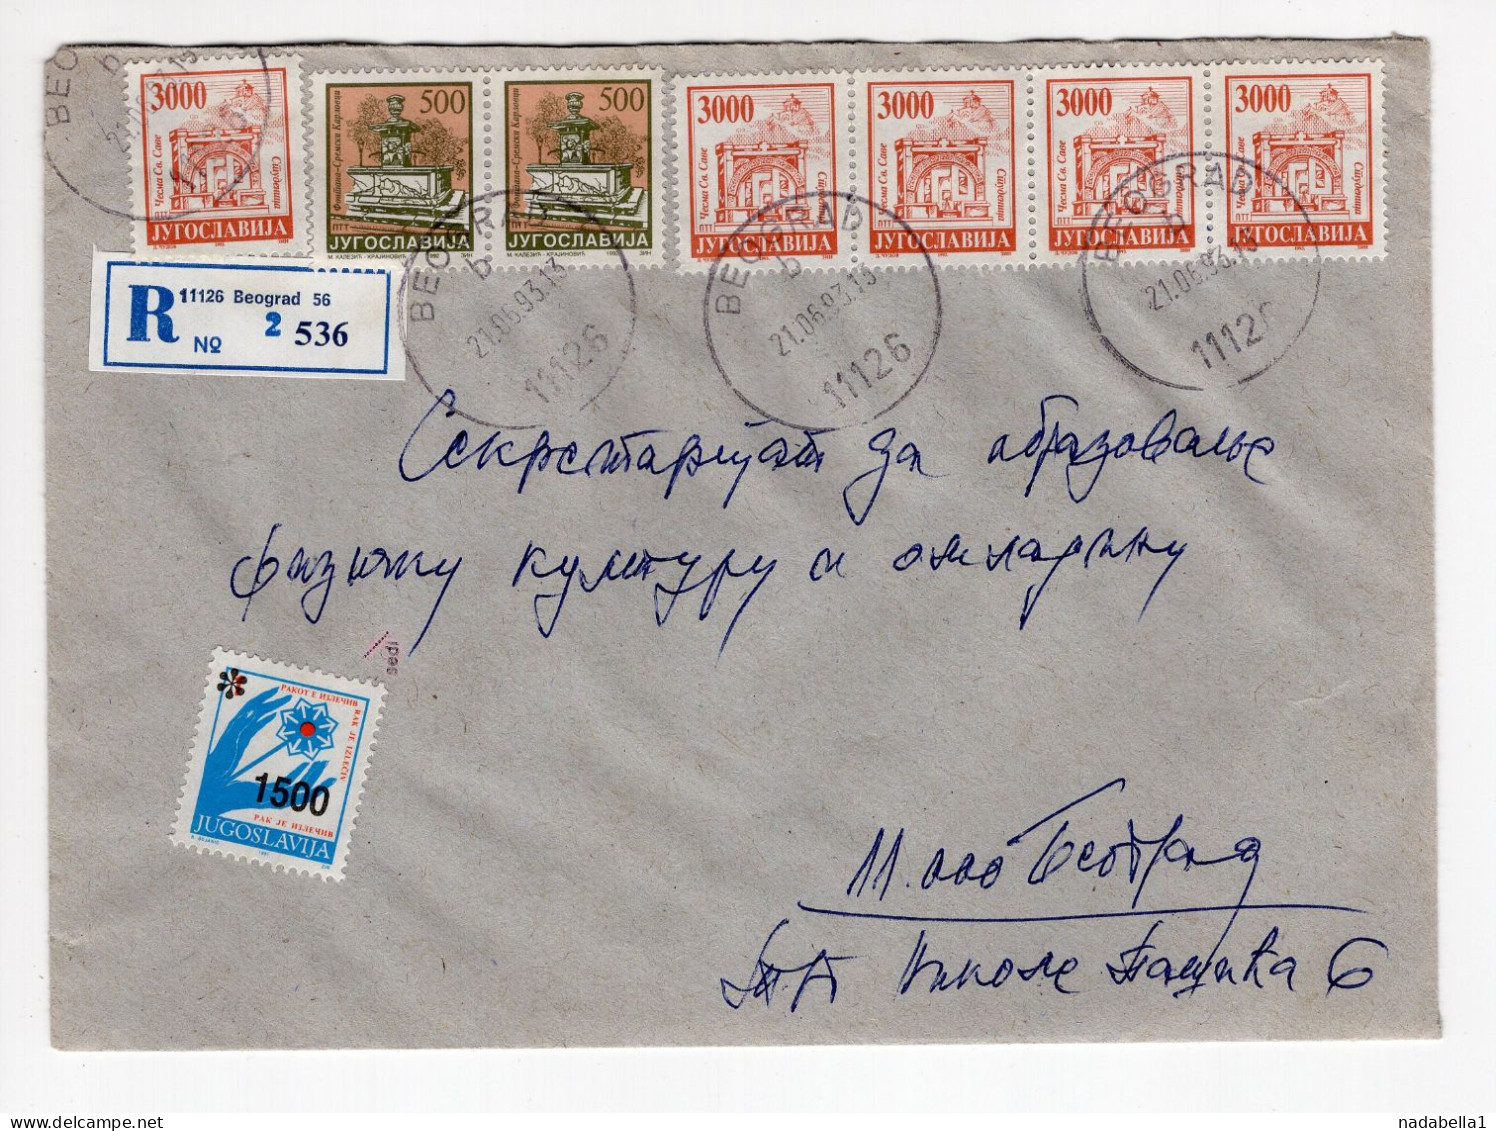 1993. YUGOSLAVIA,SERBIA,BELGRADE LOCAL MAIL,RECORDED,COVER,INFLATION,INFLATIONARY MAIL,1500 DIN ADDITIONAL STAMP - Storia Postale